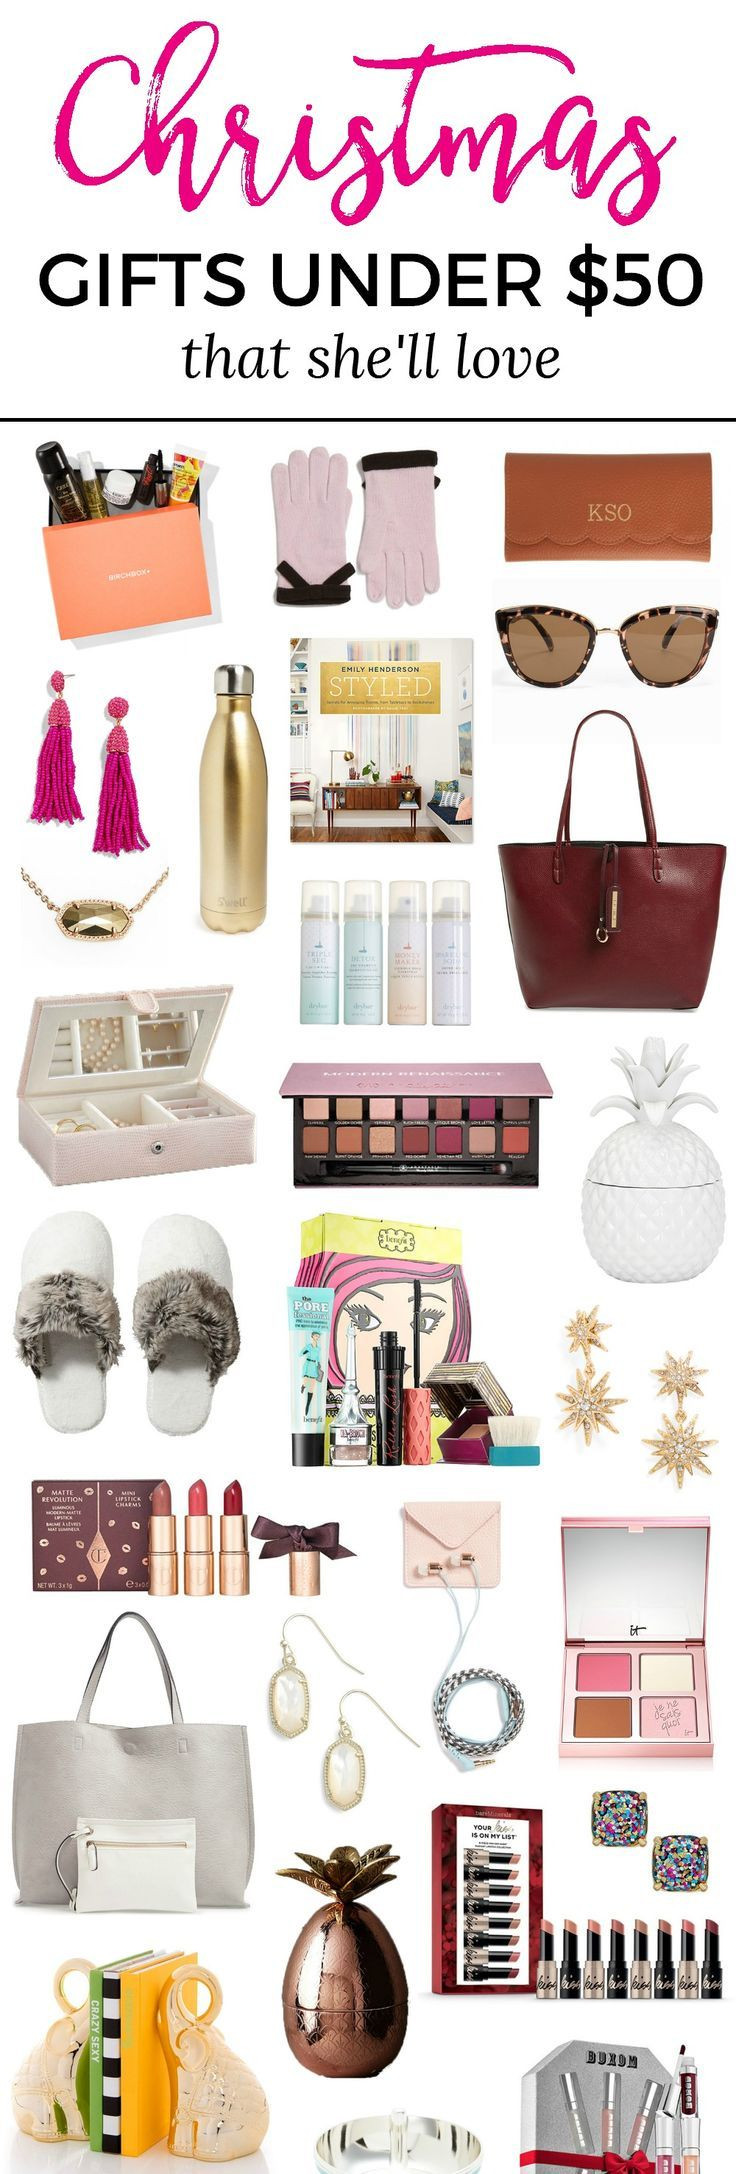 Female Birthday Gifts
 The best Christmas t ideas for women under $50 You won